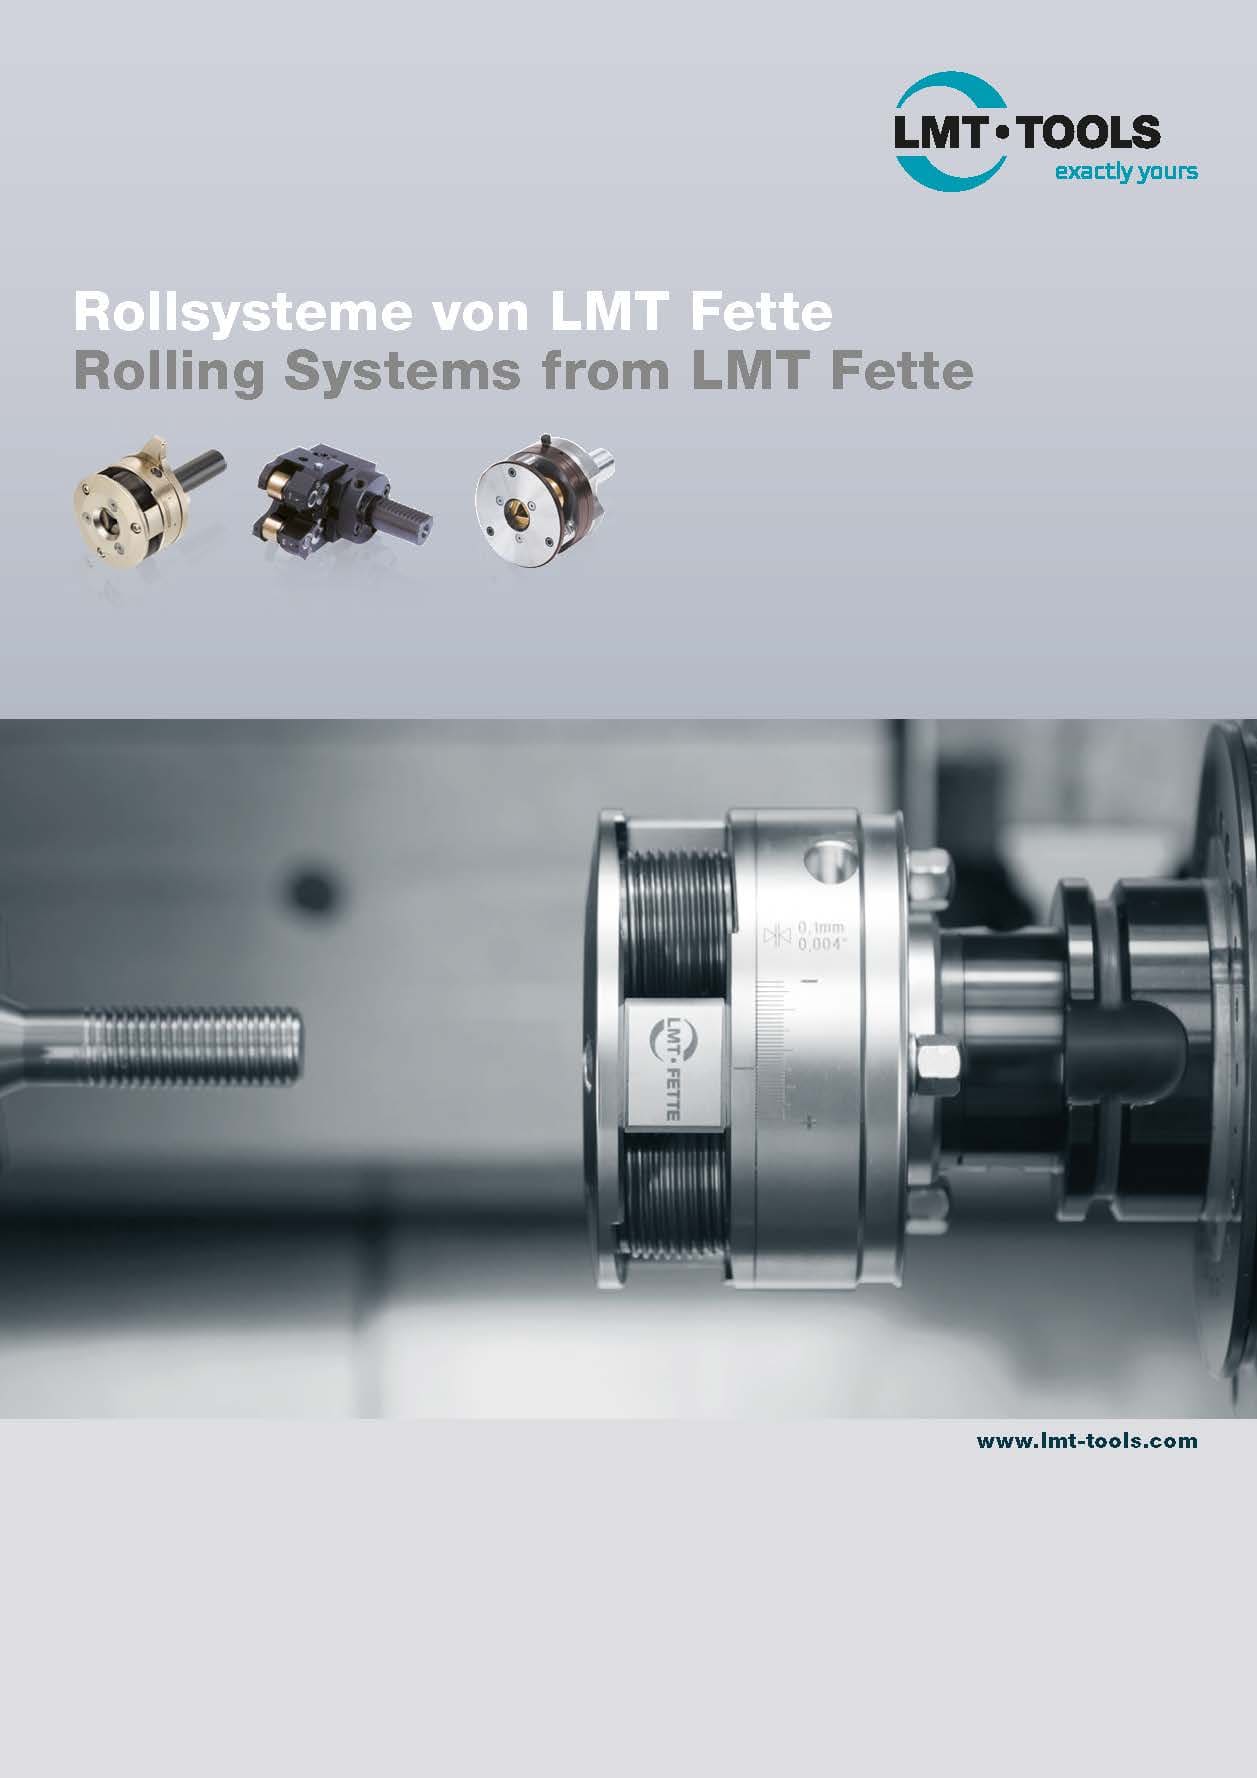 Rolling Systems from LMT Fette - Our program